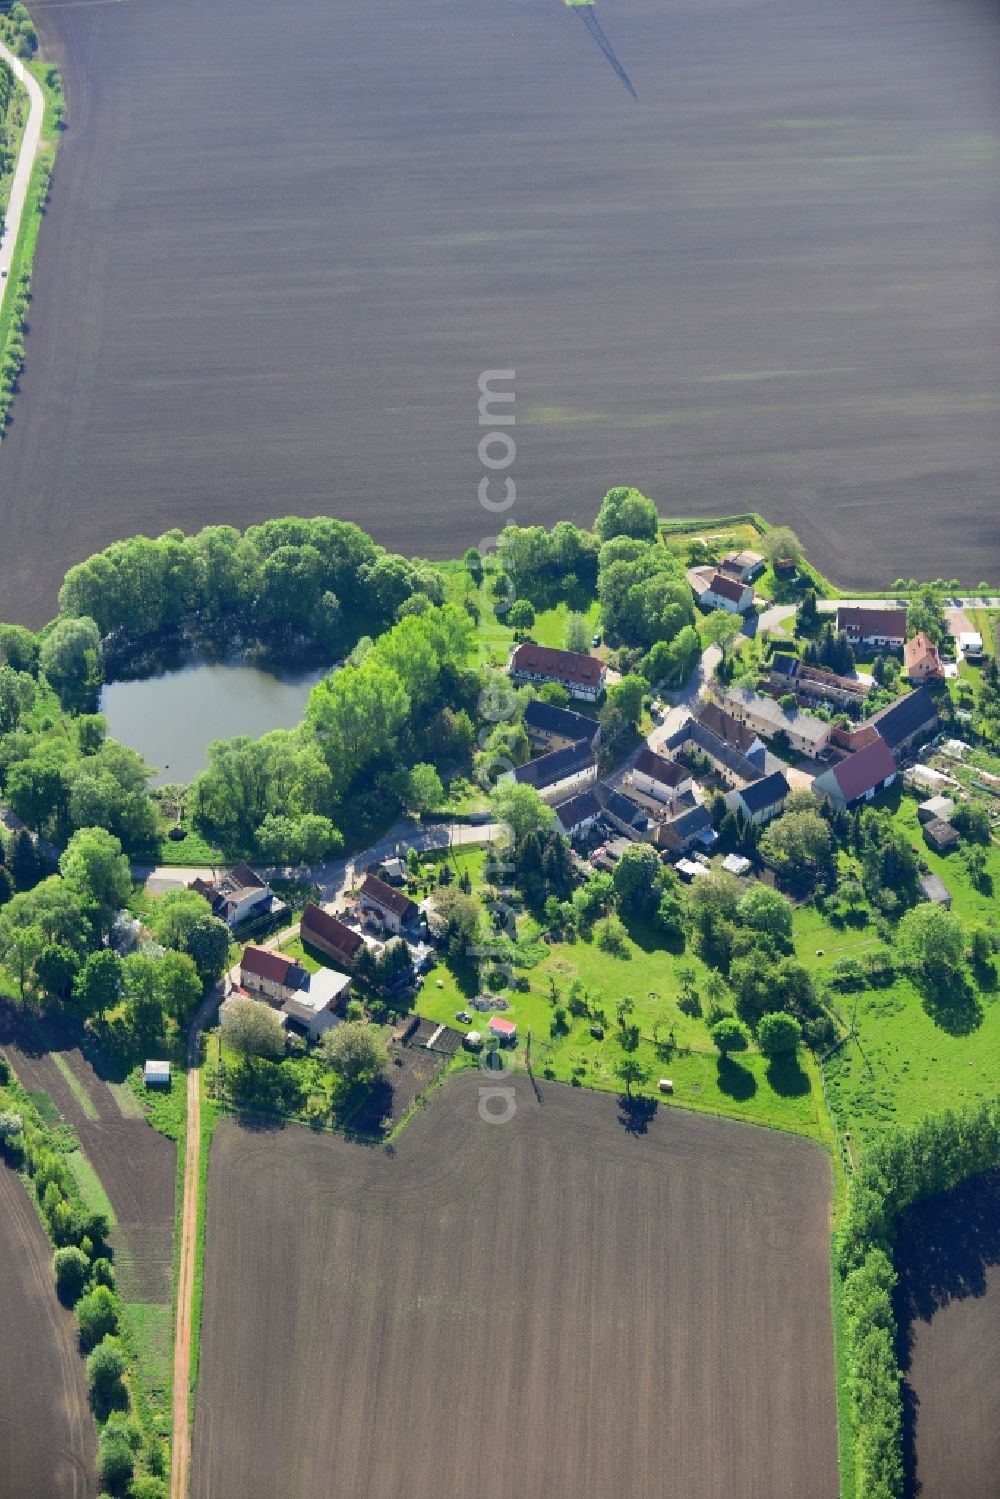 Aerial image Elsteraue - View of the Krimmitzschen part of the locality of Rehmsdorf in Elsteraue in the state of Saxony-Anhalt. The borough and municipiality Elsteraue is located on Weisse Elster river in the Burgenland county district. Krimmitzschen consists of agricultural land, estates and a small pond